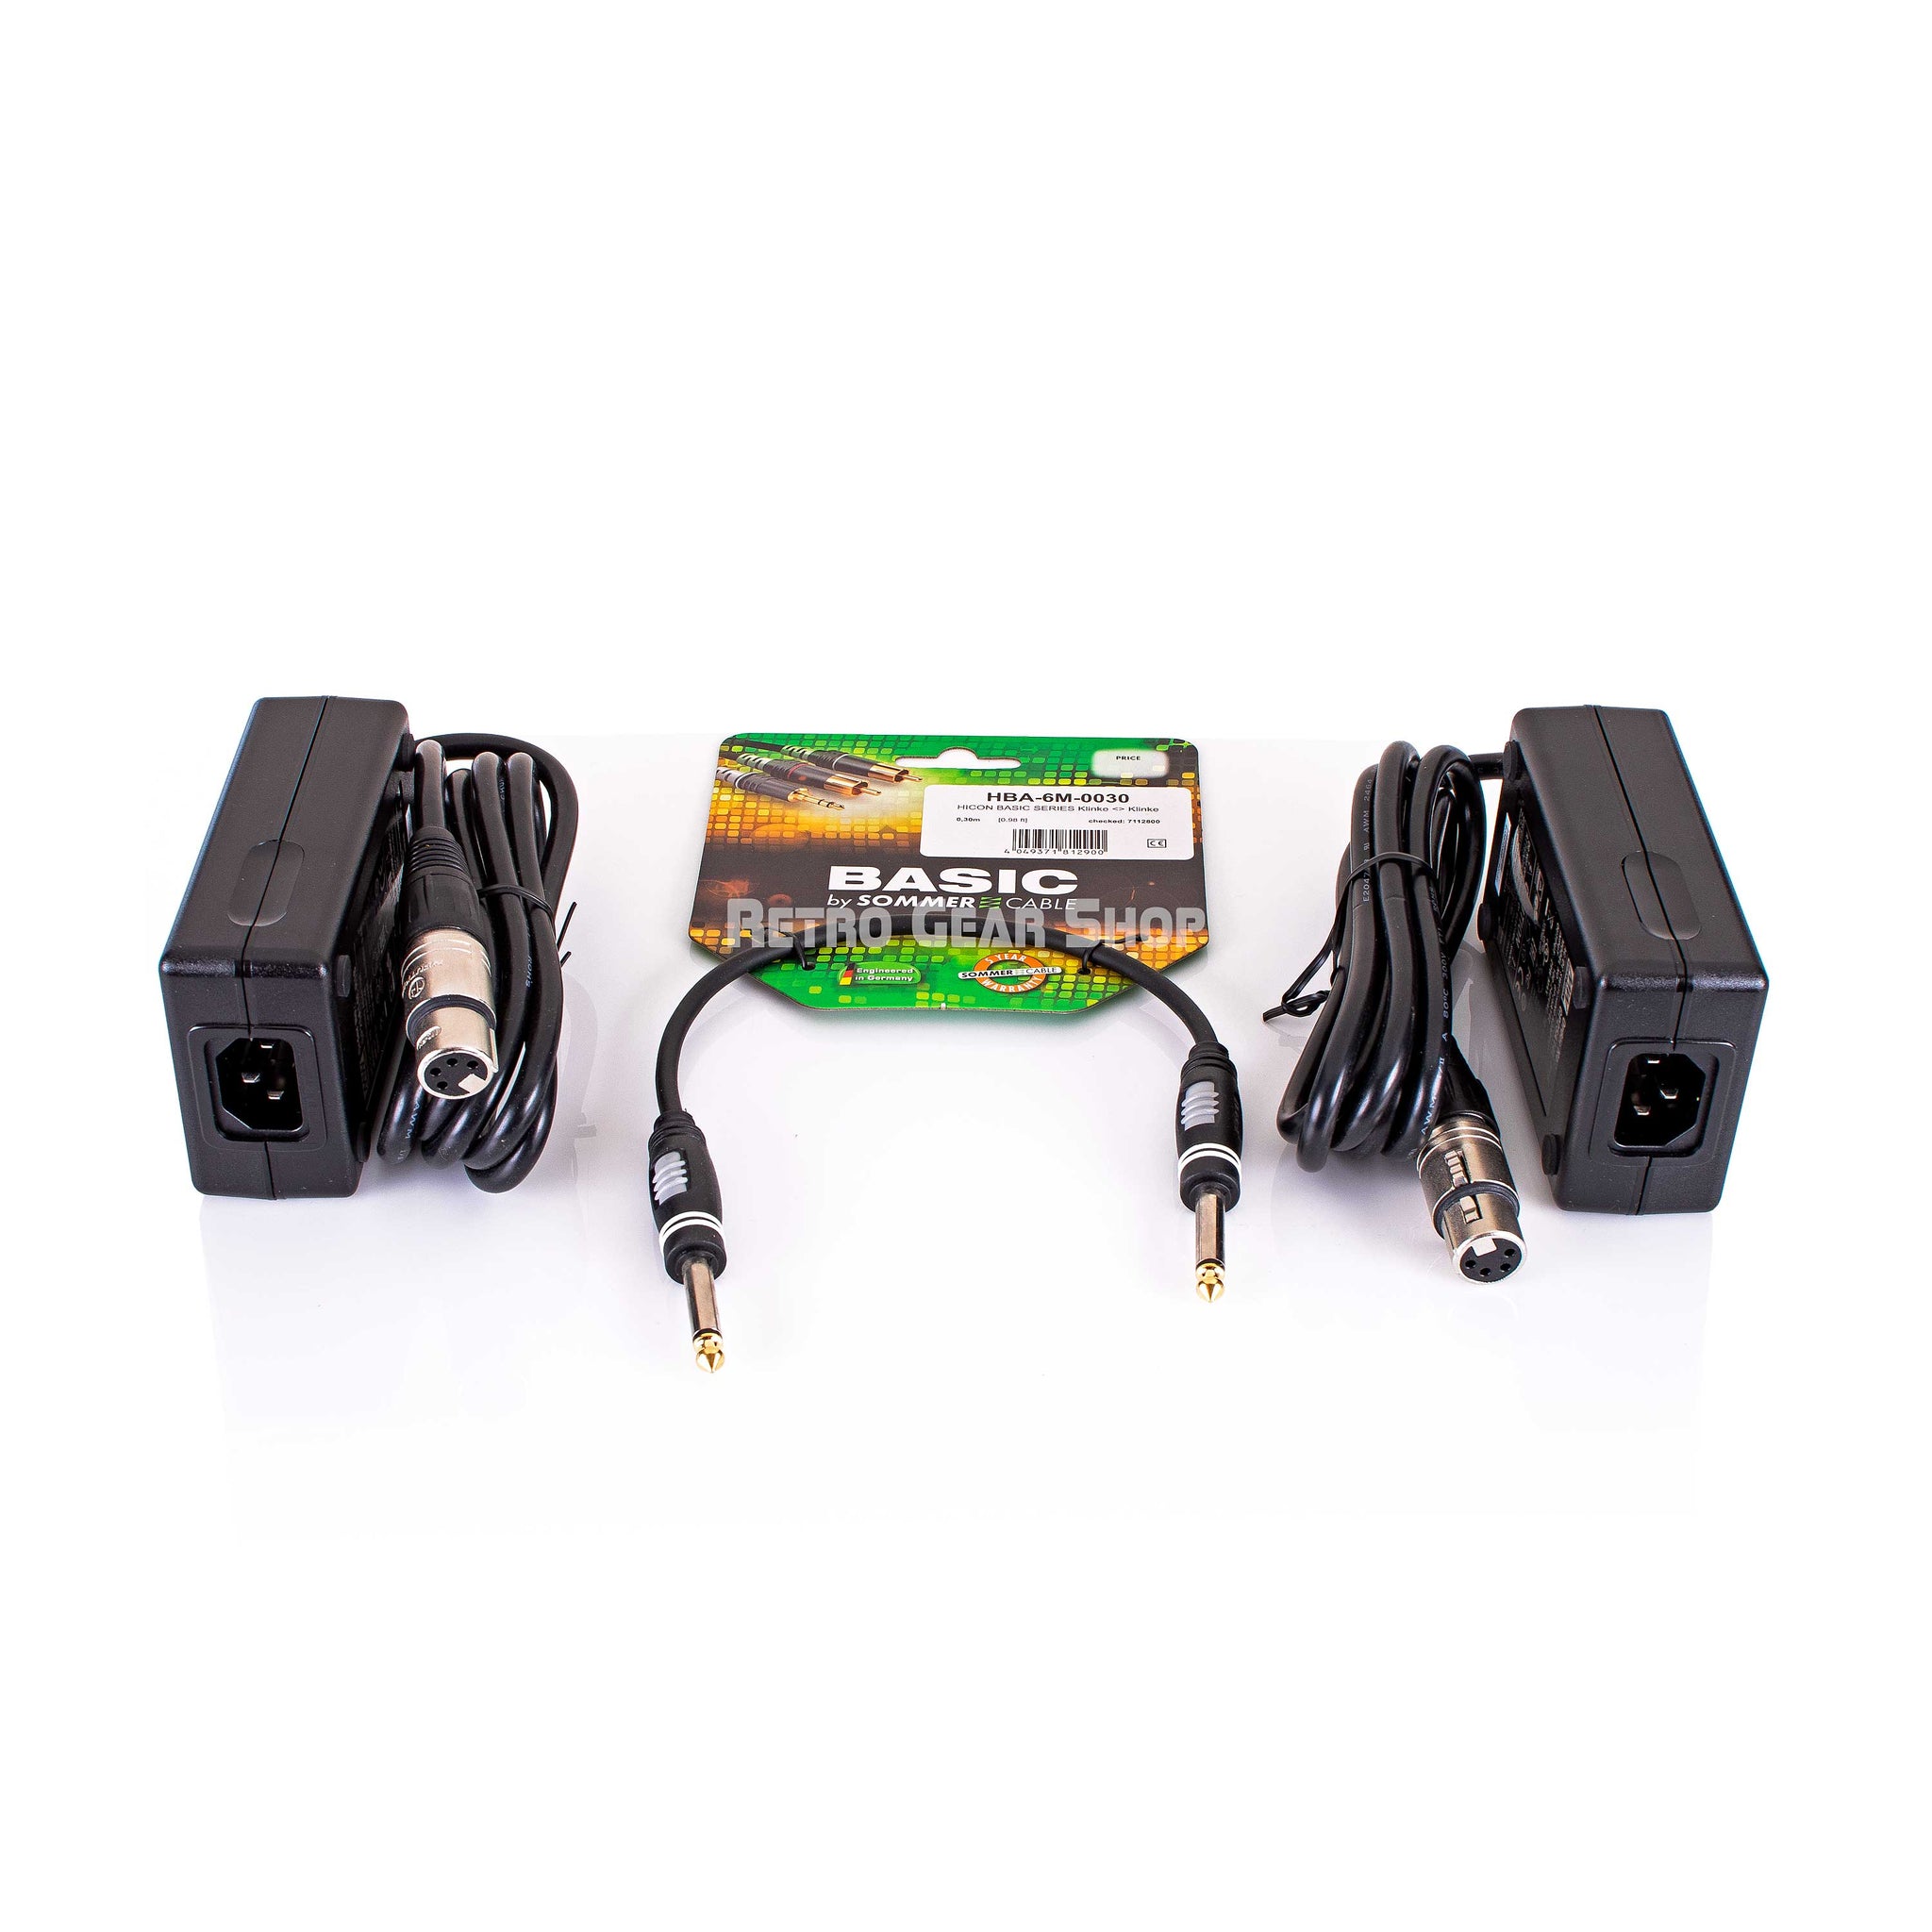 Rockruepel Sidechain One Stereo Pair PSU Link Cable